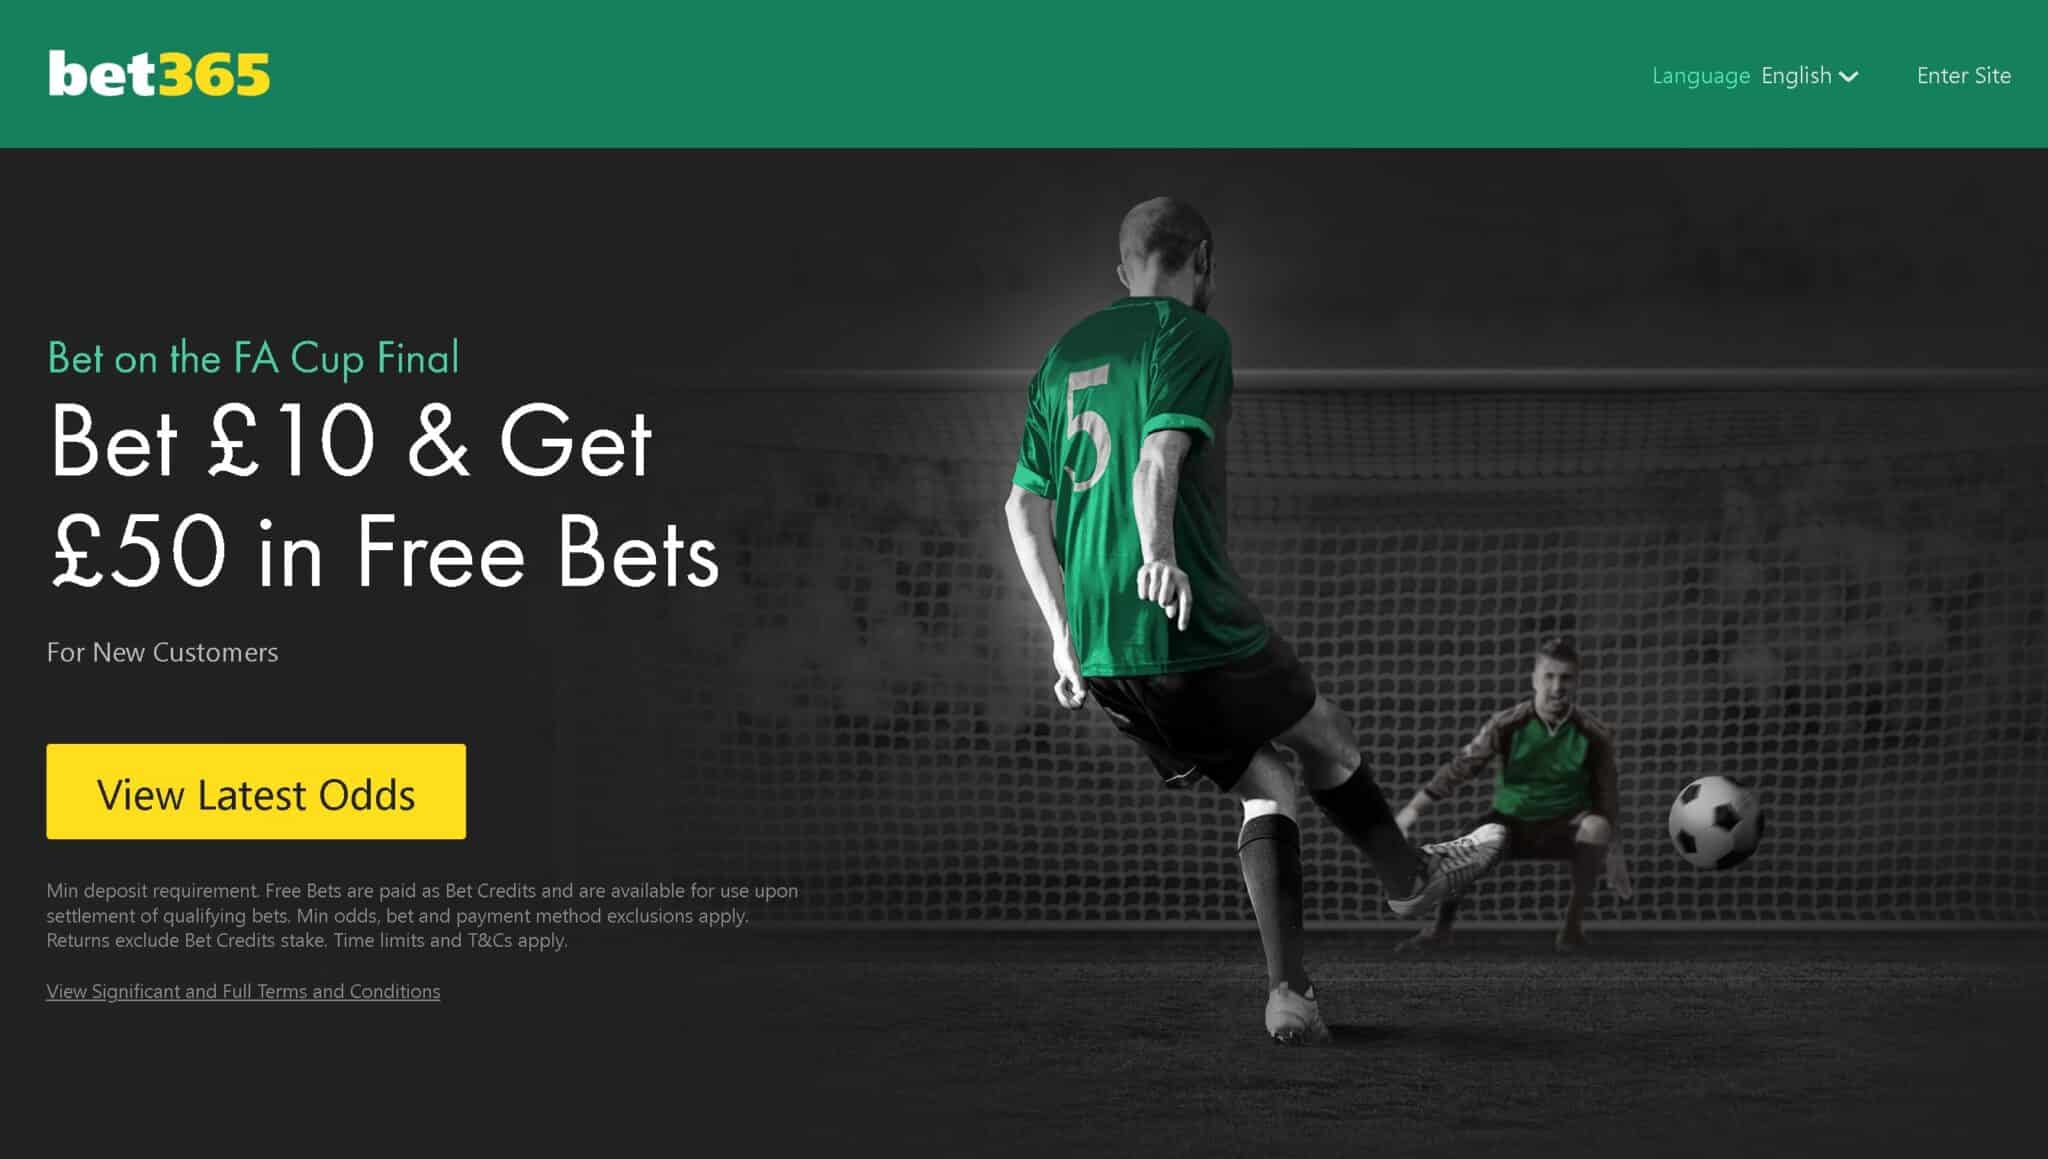 FA Cup Final Free Bets at bet365 Bet £10 Free Bets